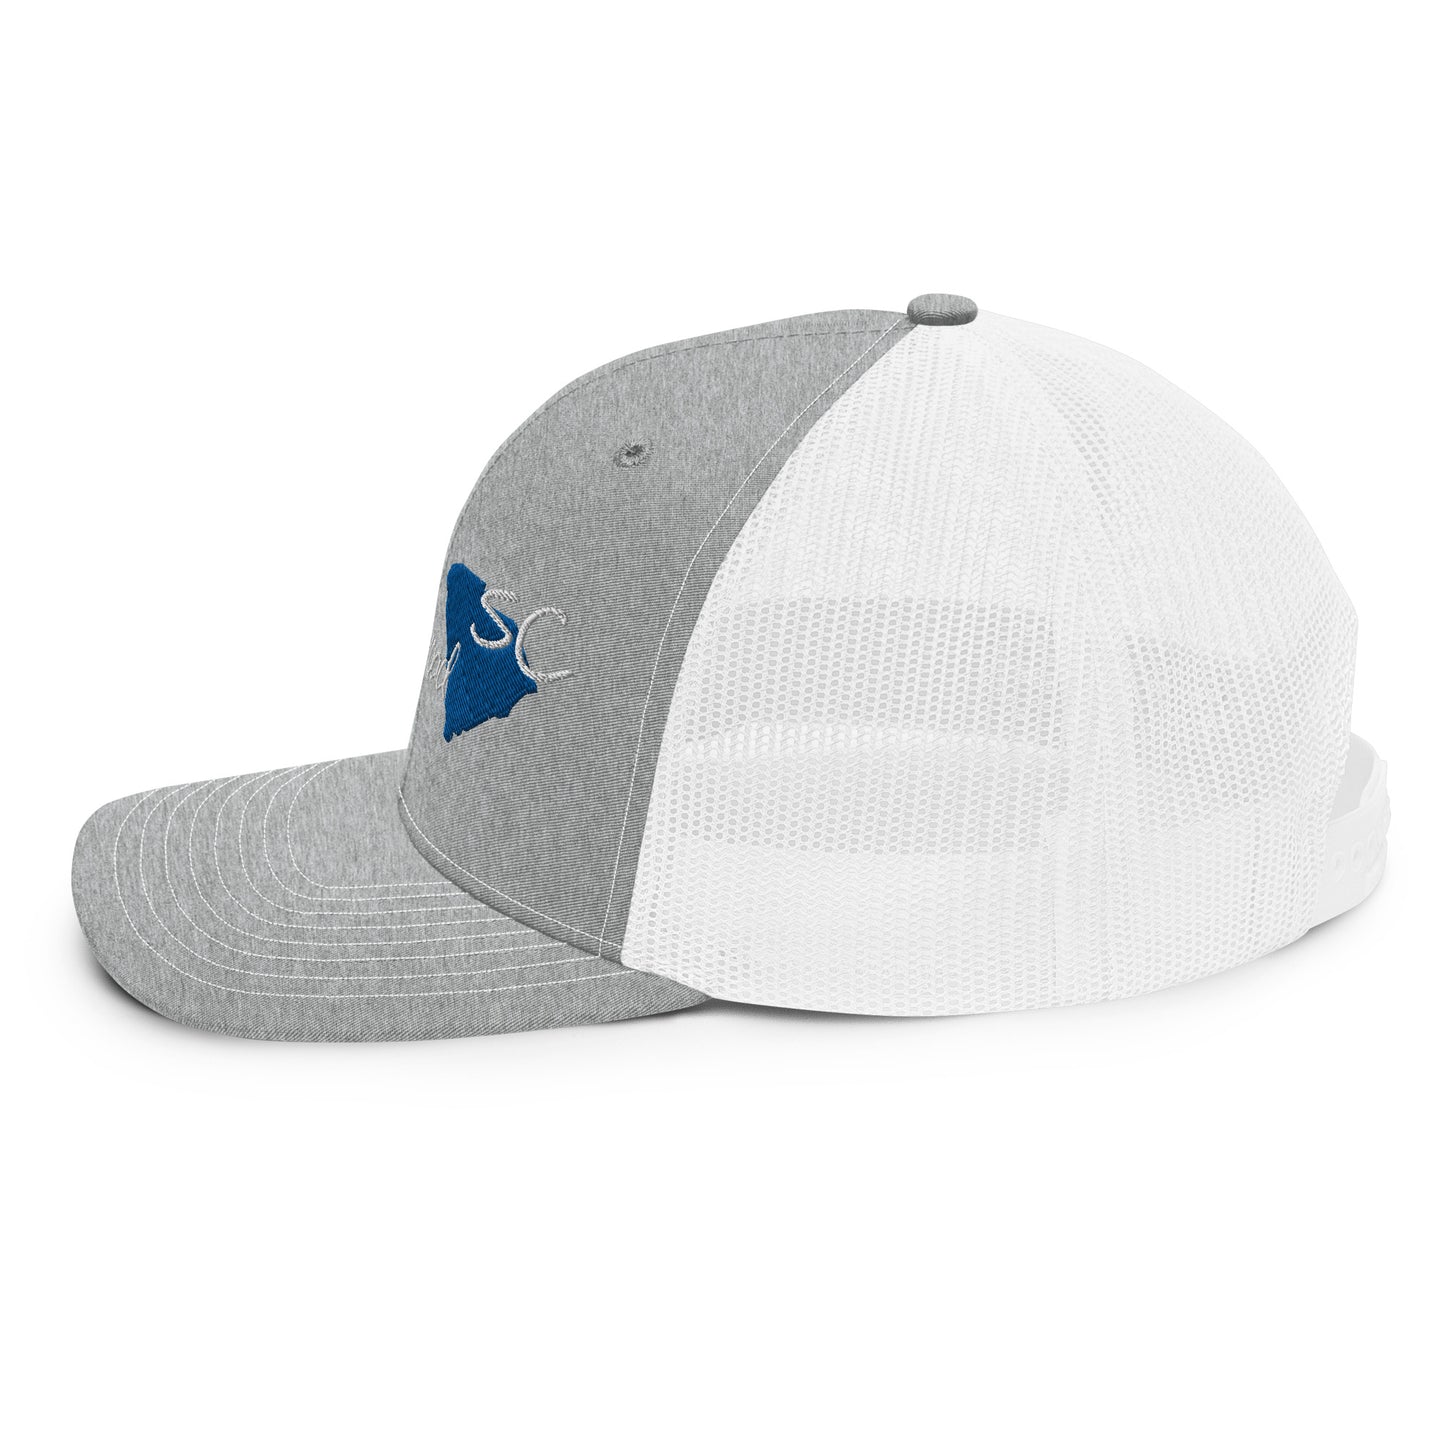 a gray and white hat with a blue star on it